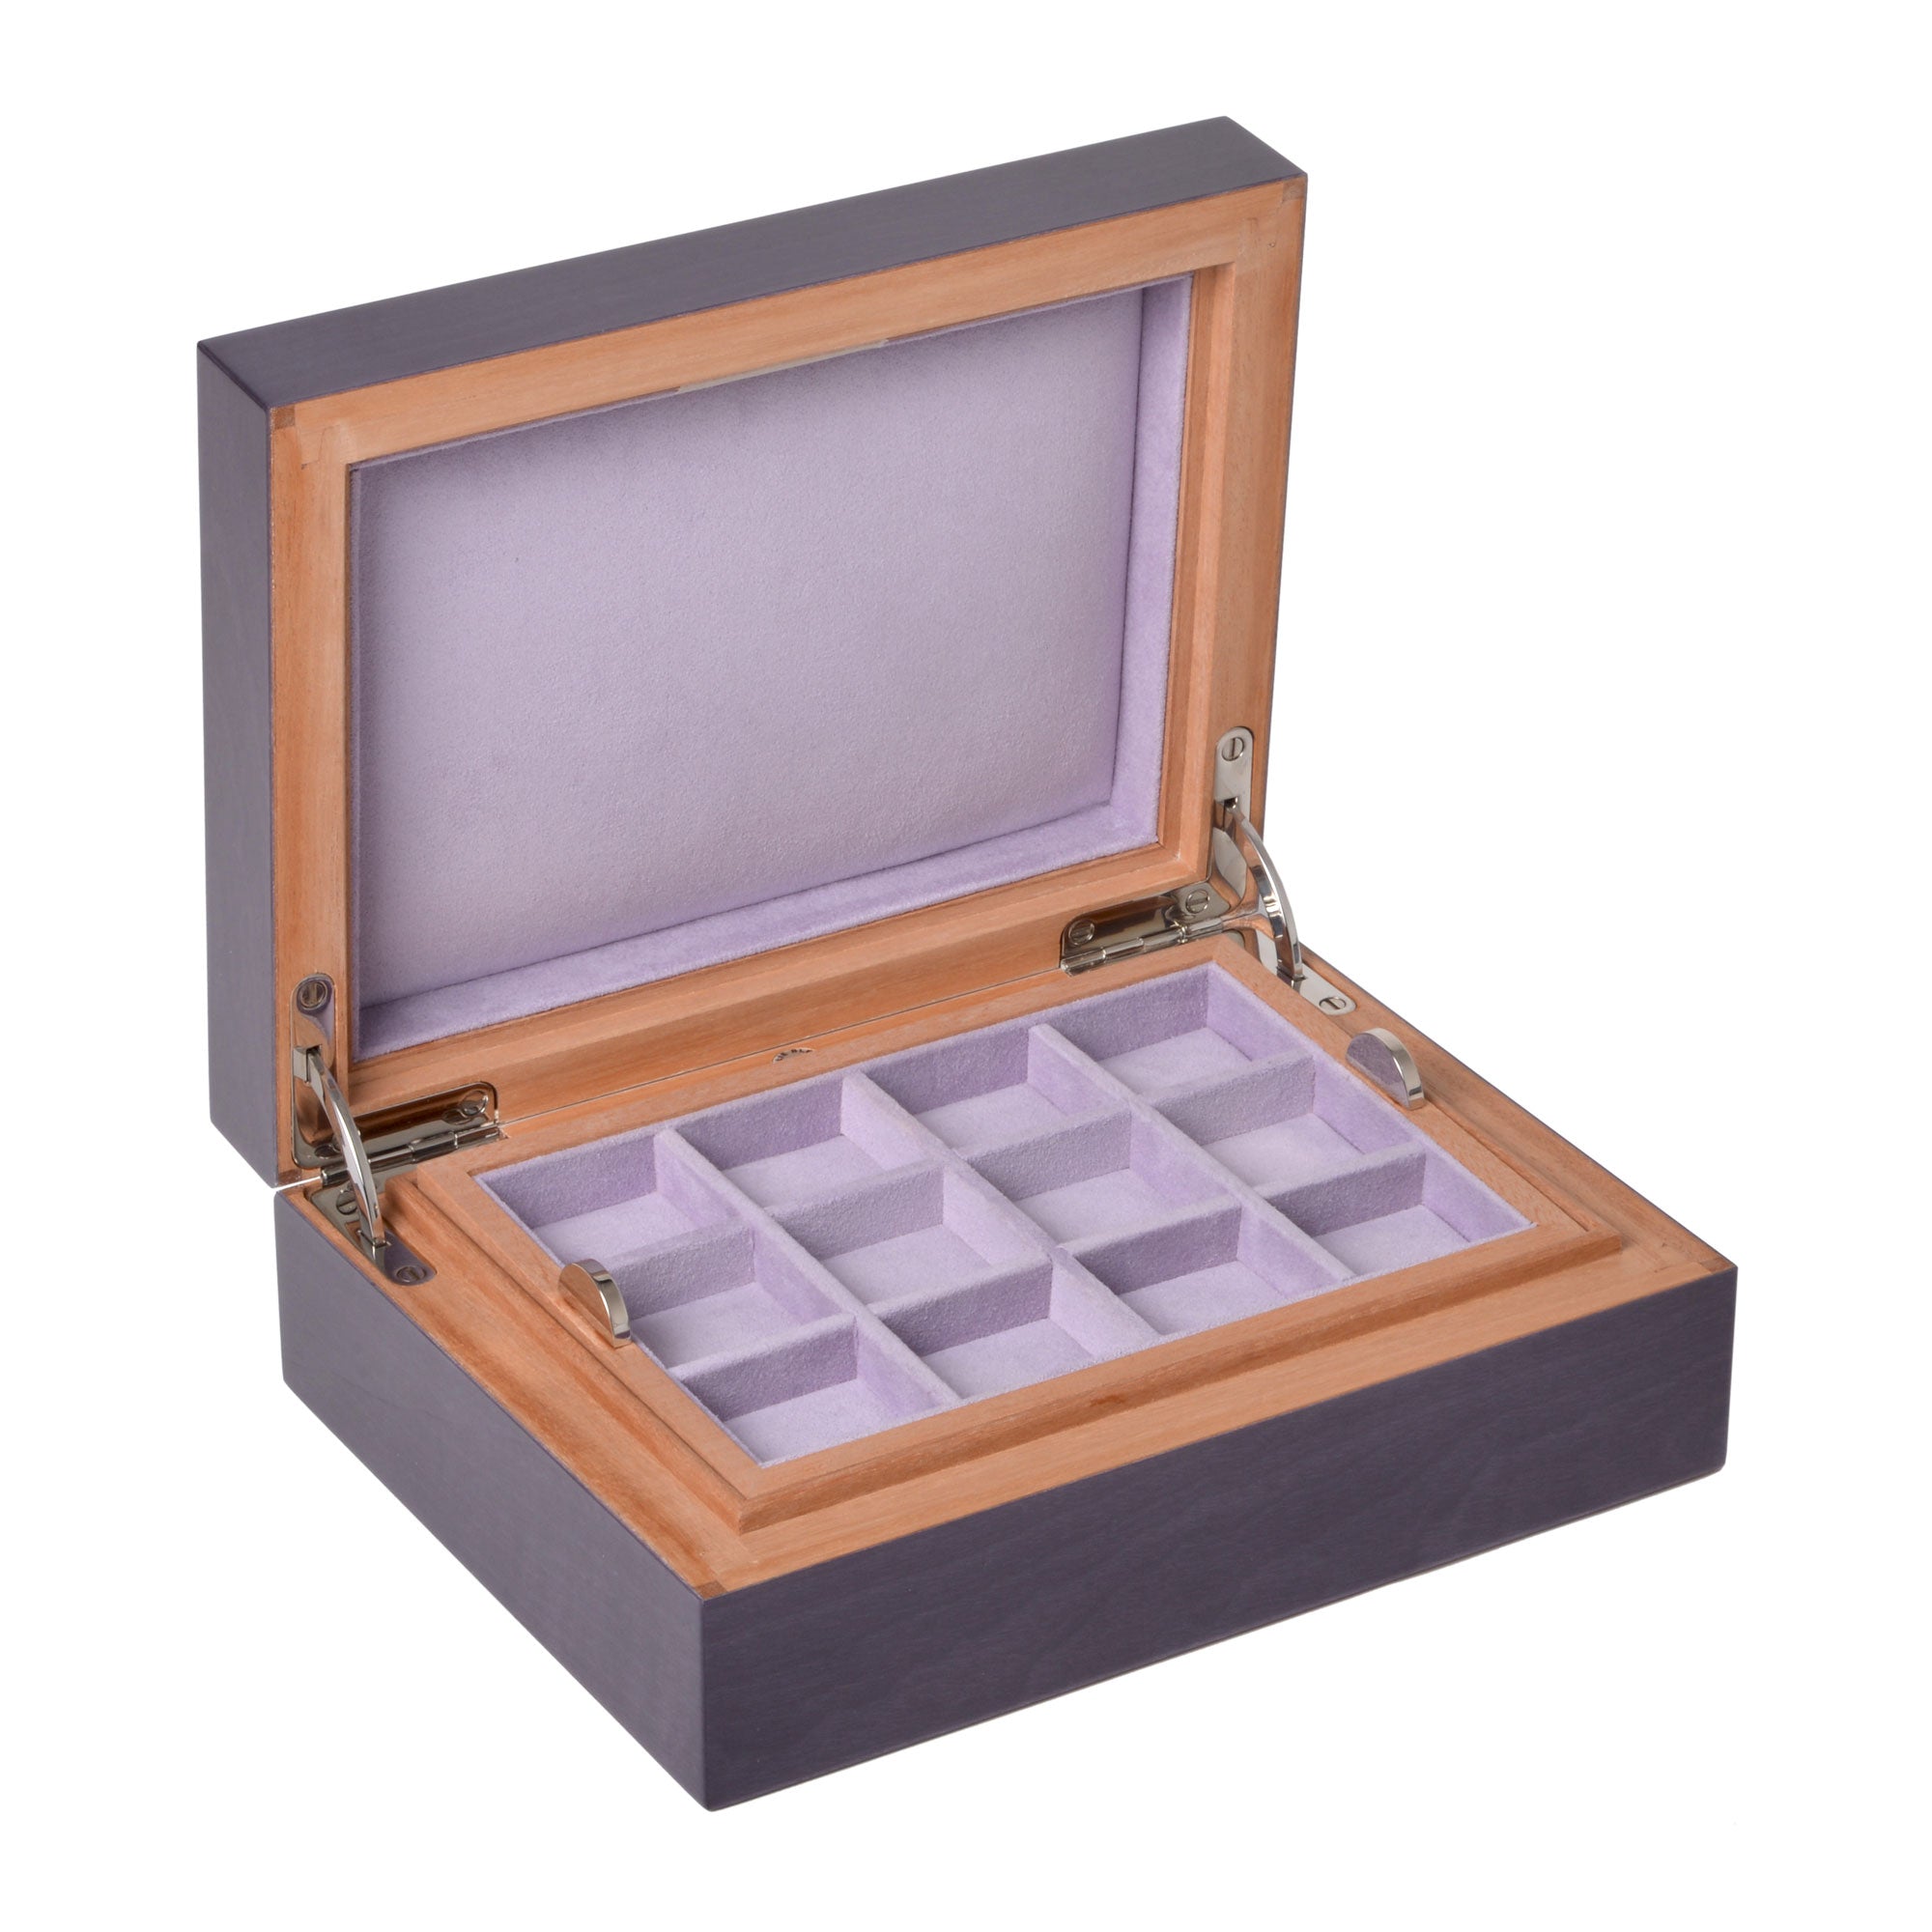 "Fruit" - Box for 24 rings or 24 pairs of cufflinks